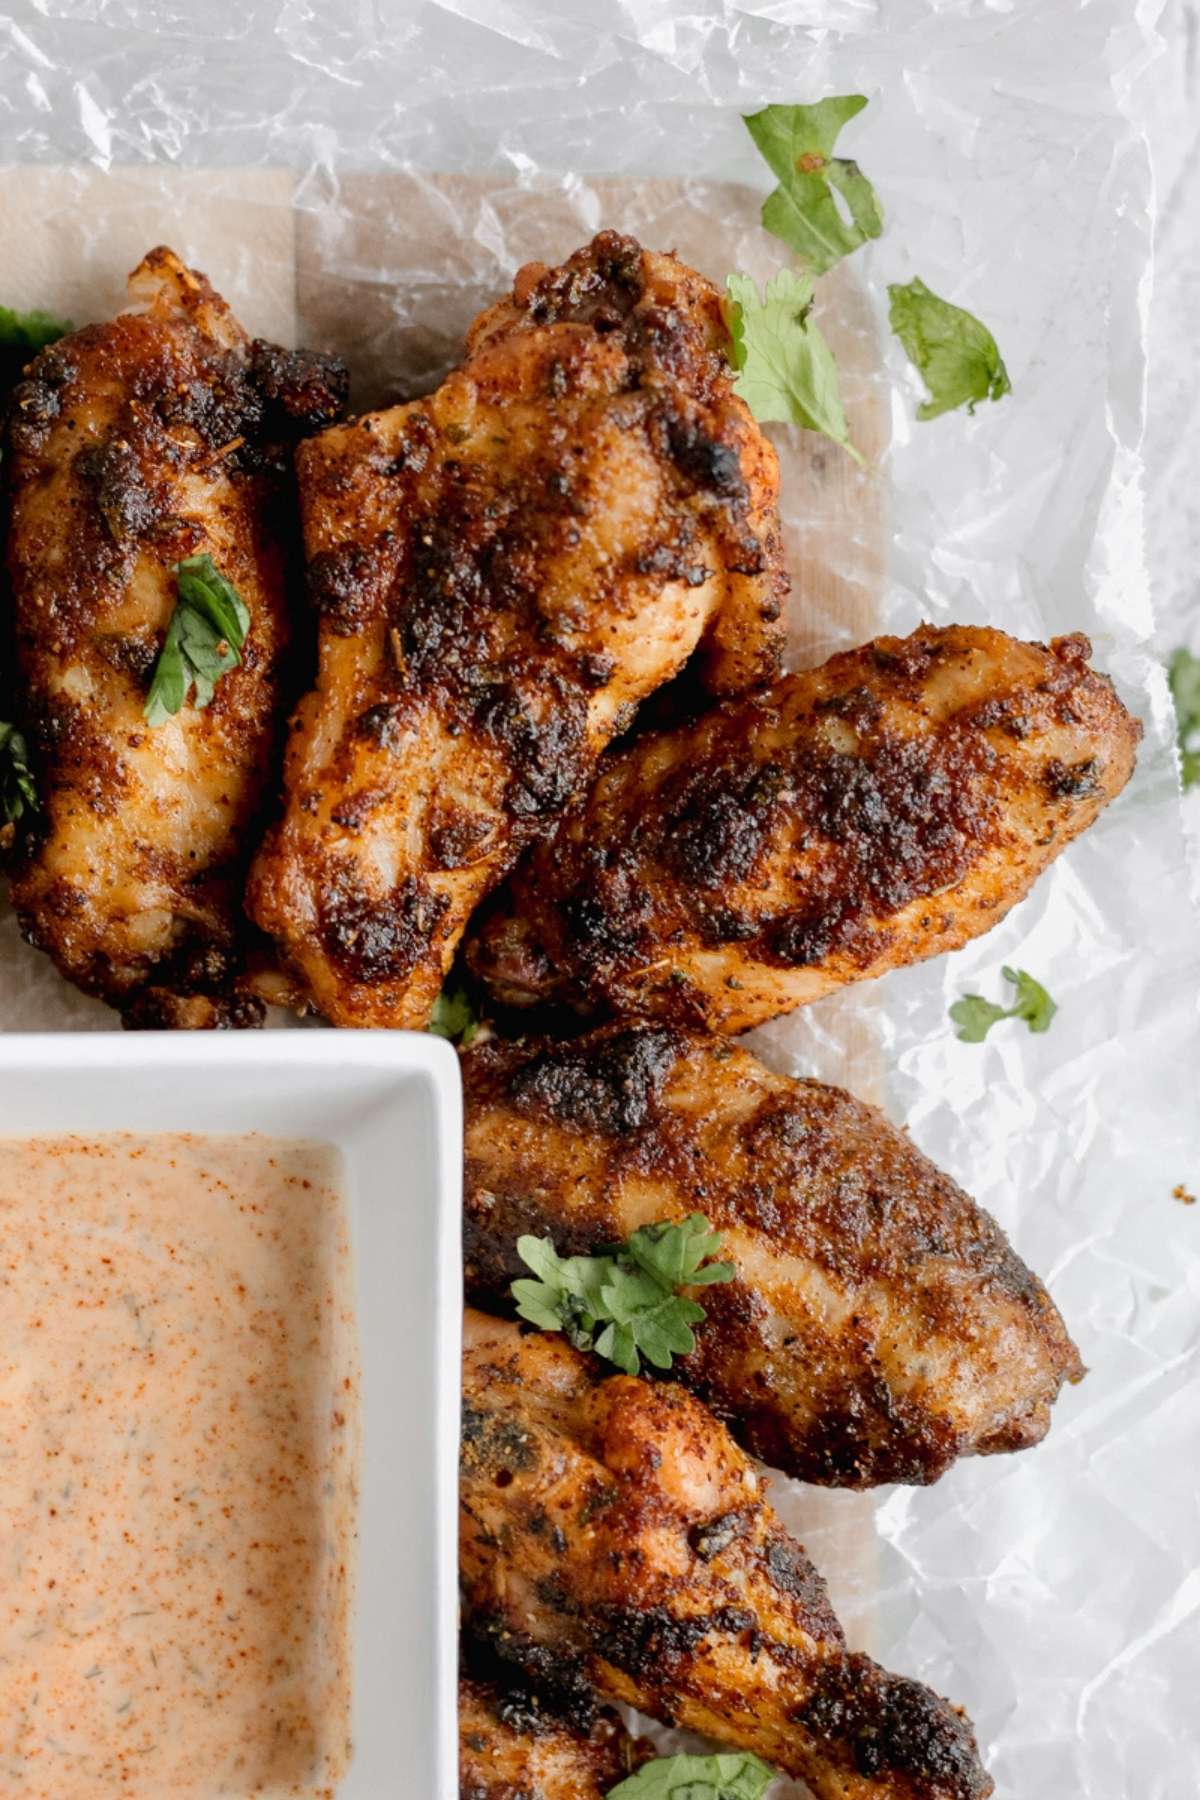 A tray of cilantro lime wings with chipotle ranch dipping sauce on the side.